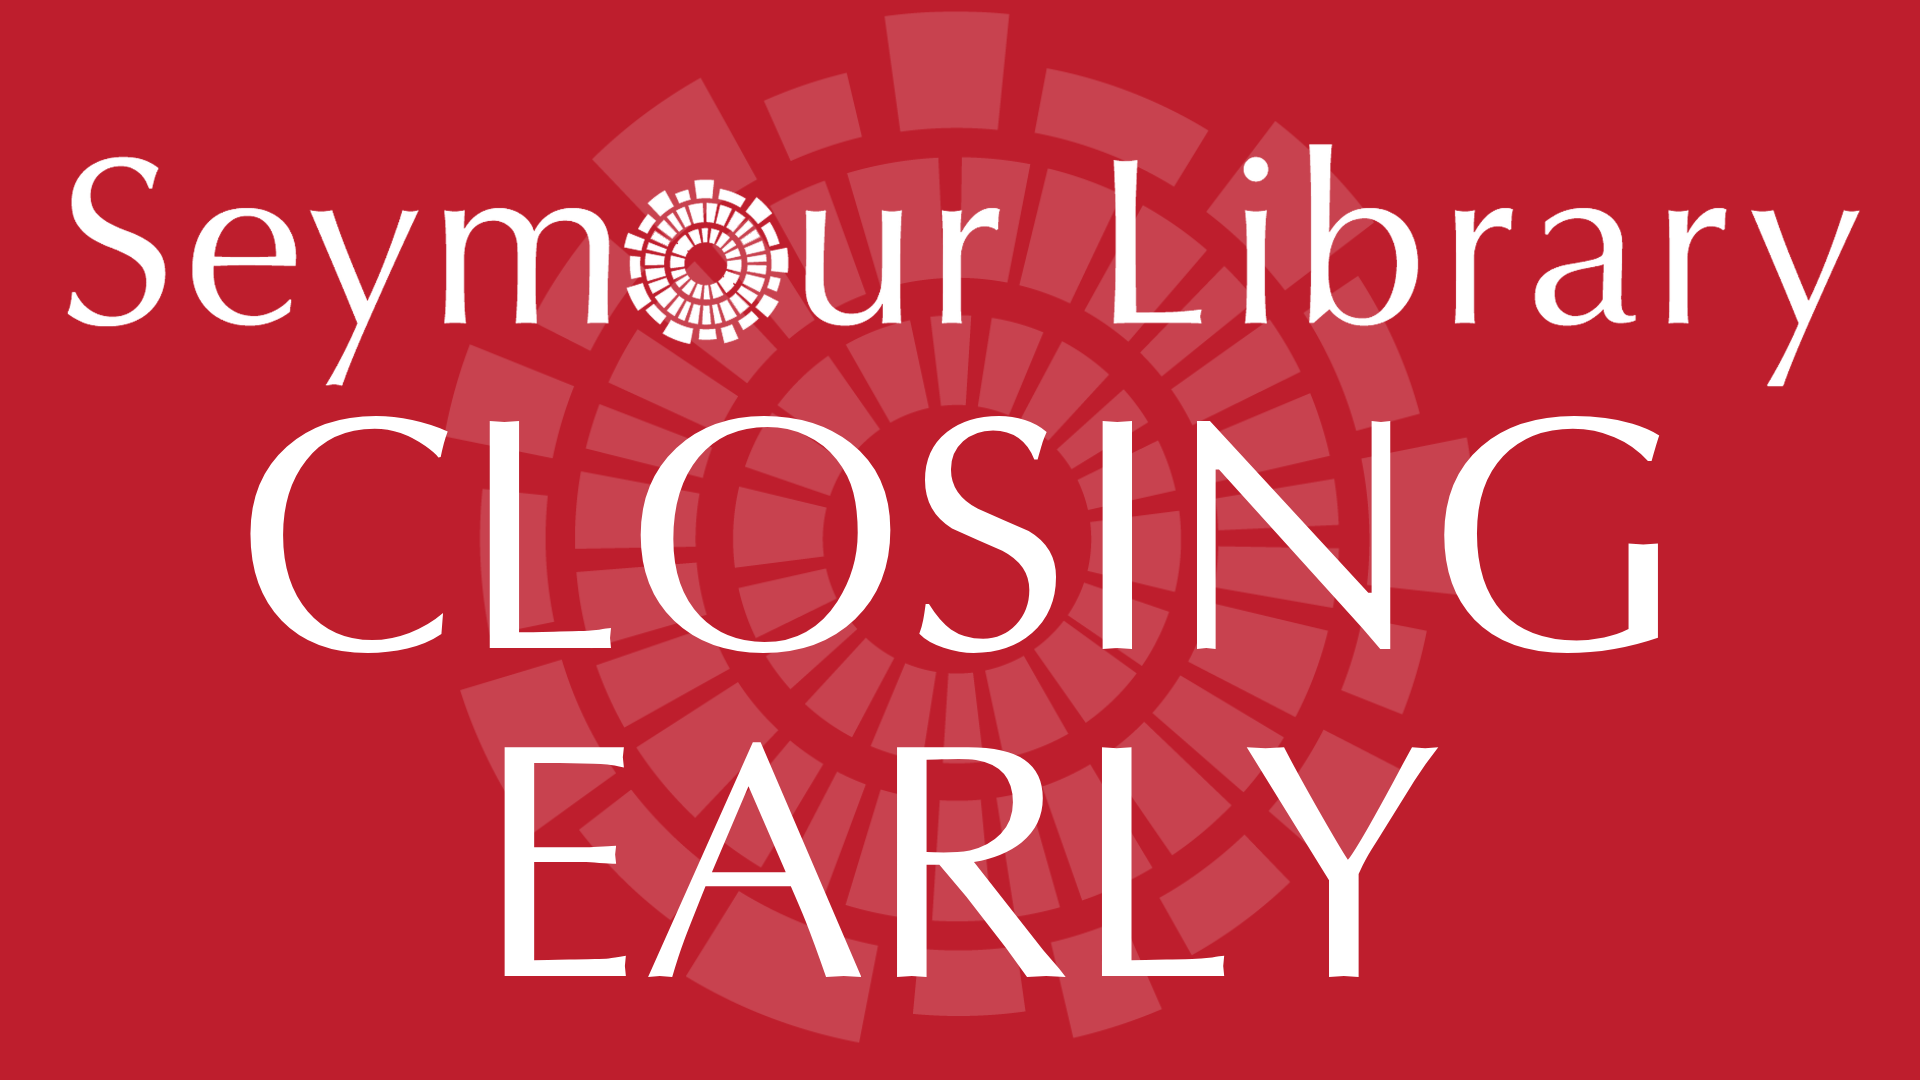 Seymour Library Closing Early